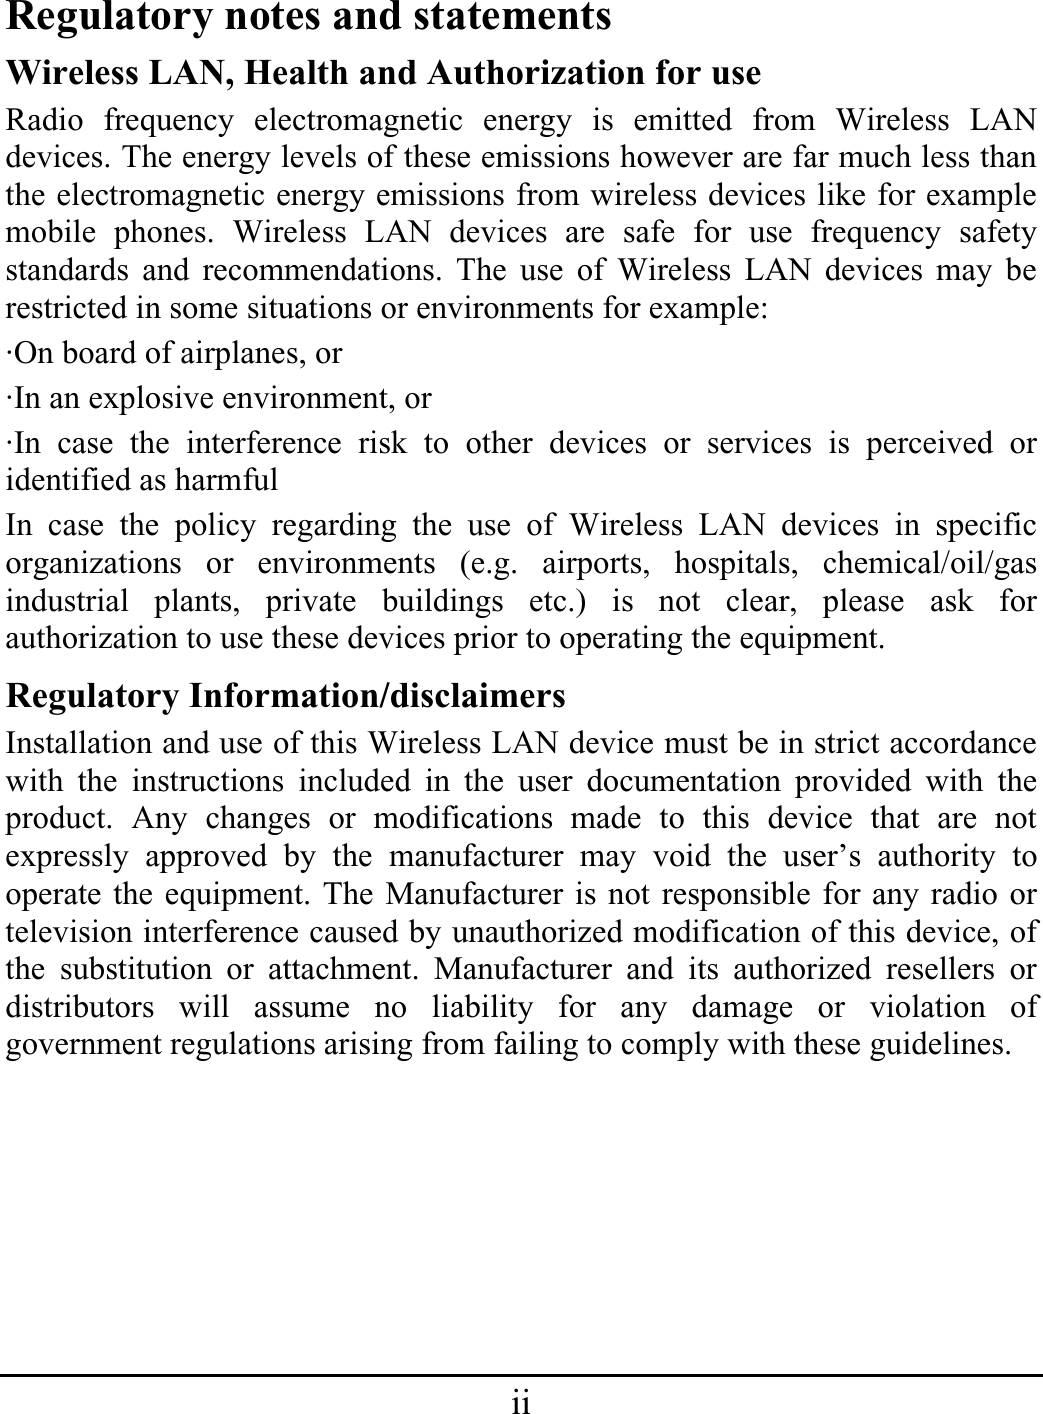 iiRegulatory notes and statements Wireless LAN, Health and Authorization for use Radio frequency electromagnetic energy is emitted from Wireless LAN devices. The energy levels of these emissions however are far much less than the electromagnetic energy emissions from wireless devices like for example mobile phones. Wireless LAN devices are safe for use frequency safety standards and recommendations. The use of Wireless LAN devices may be restricted in some situations or environments for example: ·On board of airplanes, or ·In an explosive environment, or ·In case the interference risk to other devices or services is perceived or identified as harmful In case the policy regarding the use of Wireless LAN devices in specific organizations or environments (e.g. airports, hospitals, chemical/oil/gas industrial plants, private buildings etc.) is not clear, please ask for authorization to use these devices prior to operating the equipment. Regulatory Information/disclaimers Installation and use of this Wireless LAN device must be in strict accordance with the instructions included in the user documentation provided with the product. Any changes or modifications made to this device that are not expressly approved by the manufacturer may void the user’s authority to operate the equipment. The Manufacturer is not responsible for any radio or television interference caused by unauthorized modification of this device, of the substitution or attachment. Manufacturer and its authorized resellers or distributors will assume no liability for any damage or violation of government regulations arising from failing to comply with these guidelines. 